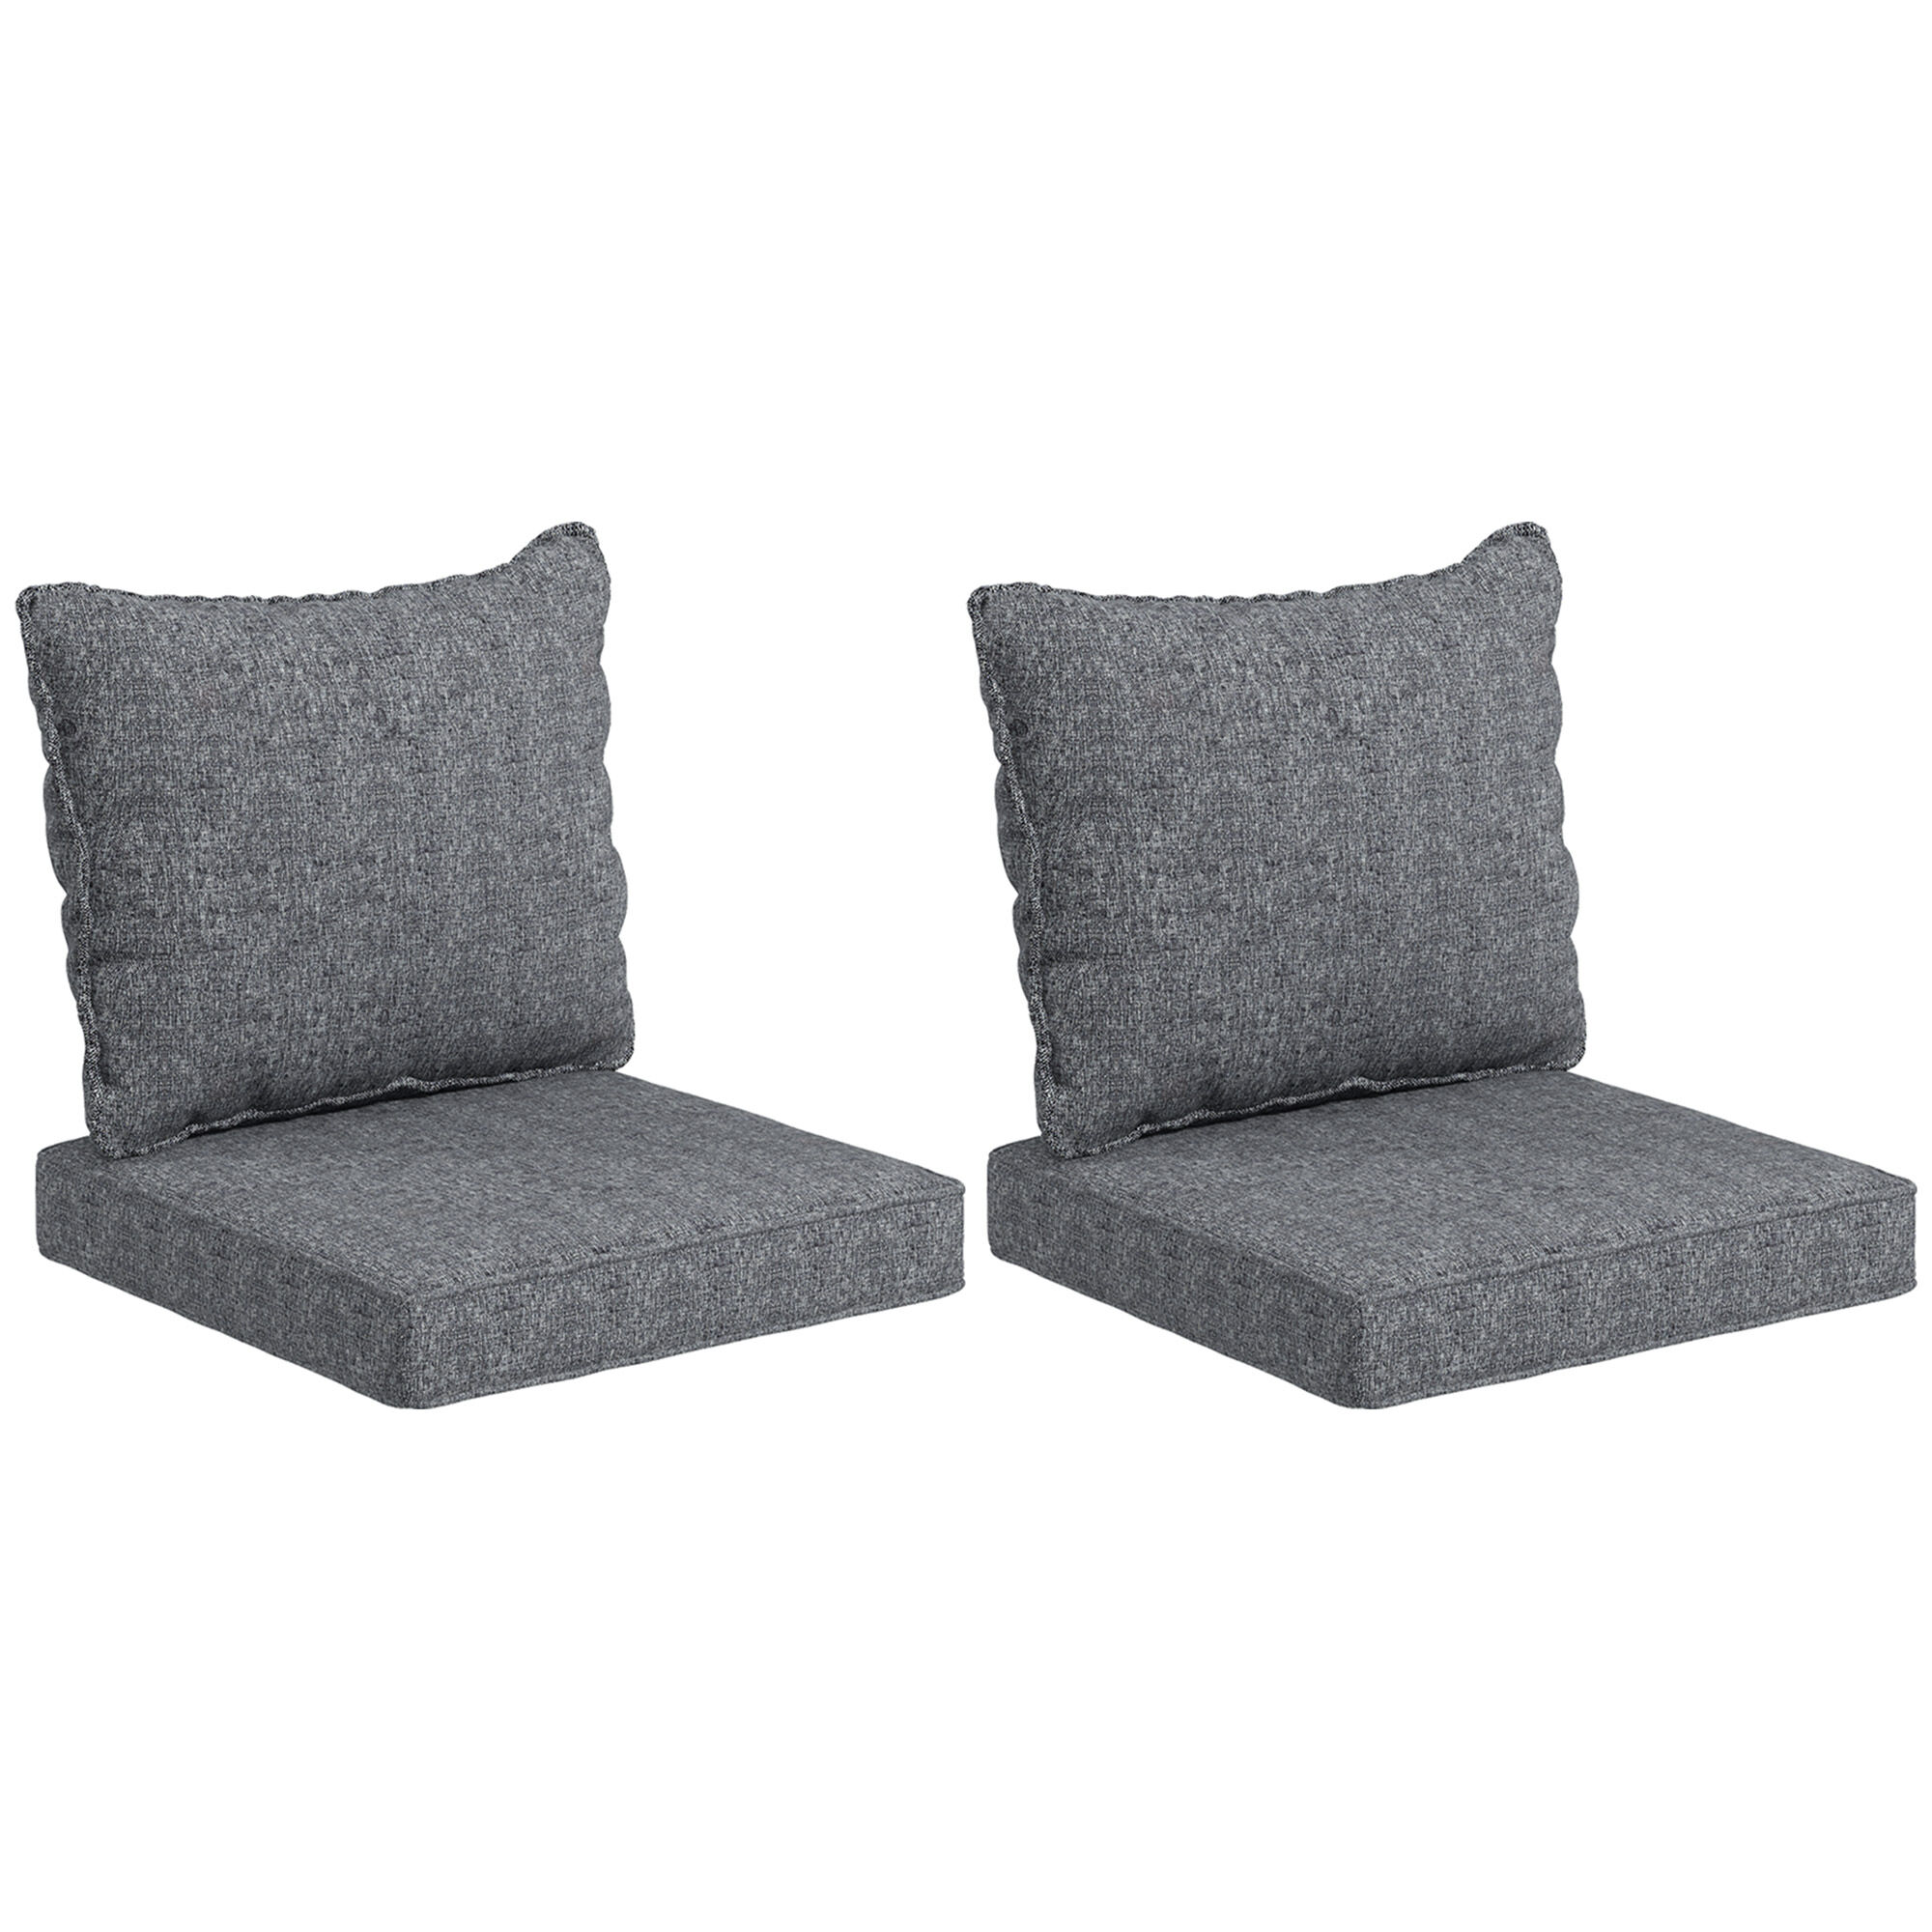 Outsunny 4 Patio Chair Cushions with Seat & Backrest, Fade Resistant Seat Replacement Cushion Set, Gray